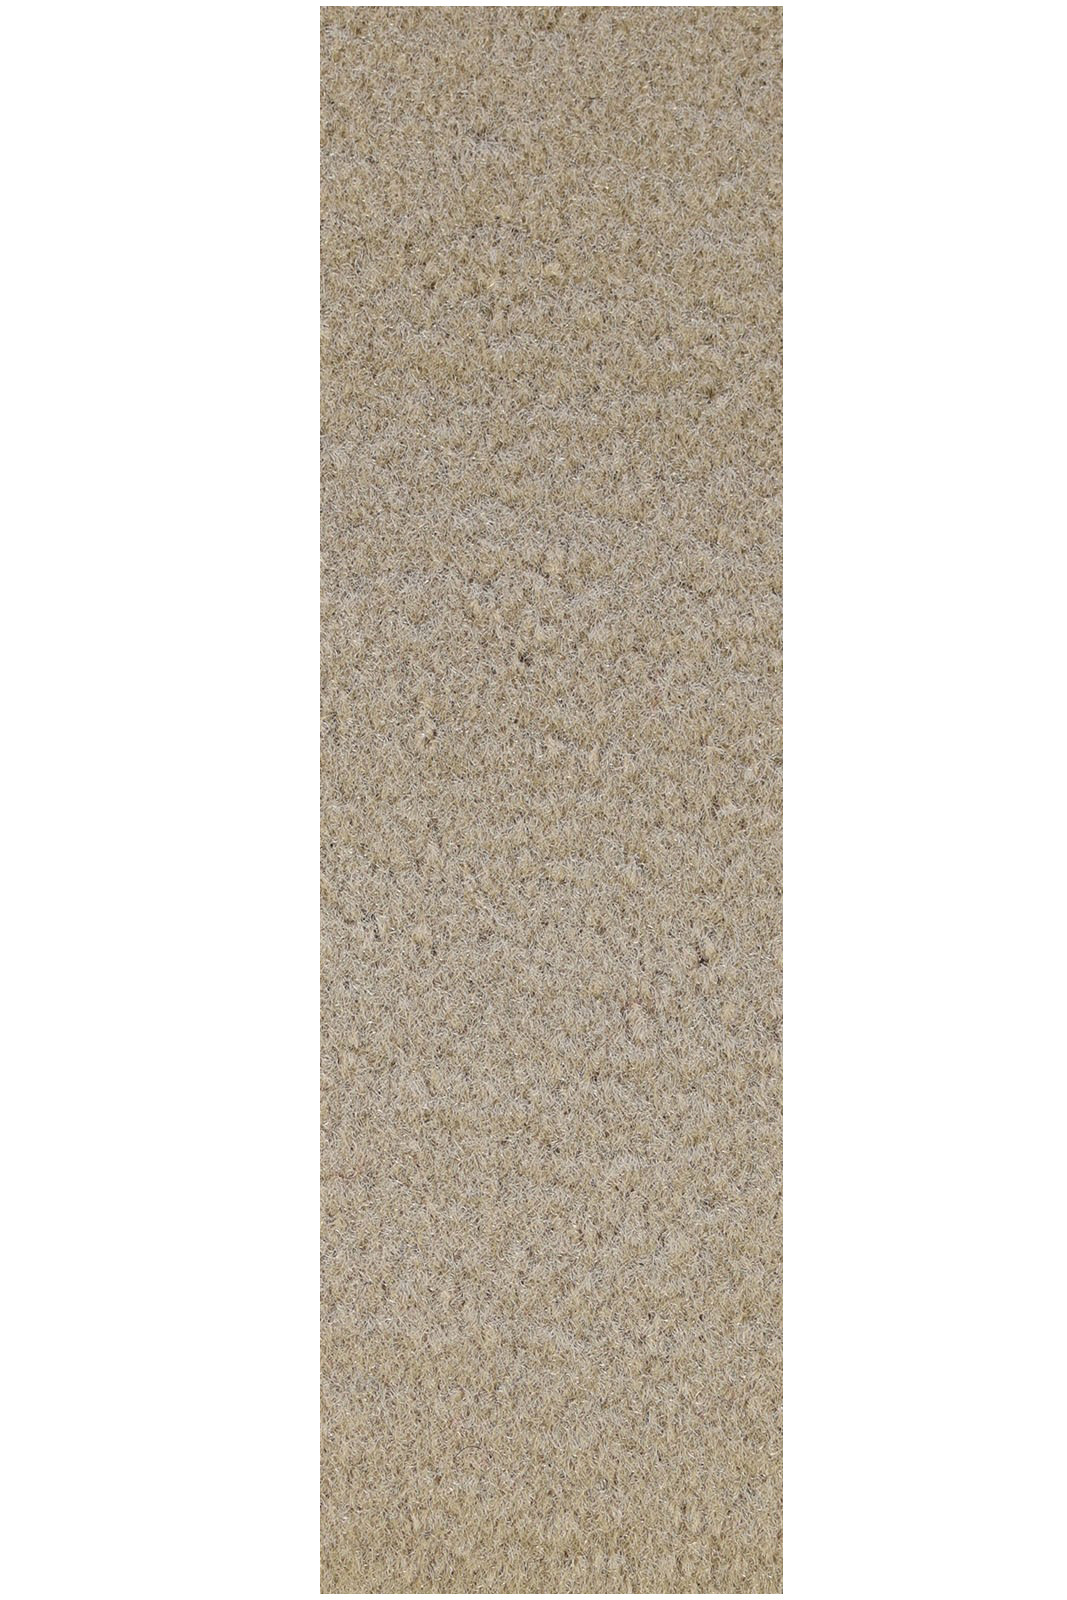 Commercial Indoor/Outdoor Beige Custom Size Runner 3' x 24' - Area Rug with Rubber Marine Backing for Patio, Porch, Deck, Boat, Basement or Garage with Premium Bound Polyester Edges - image 1 of 1